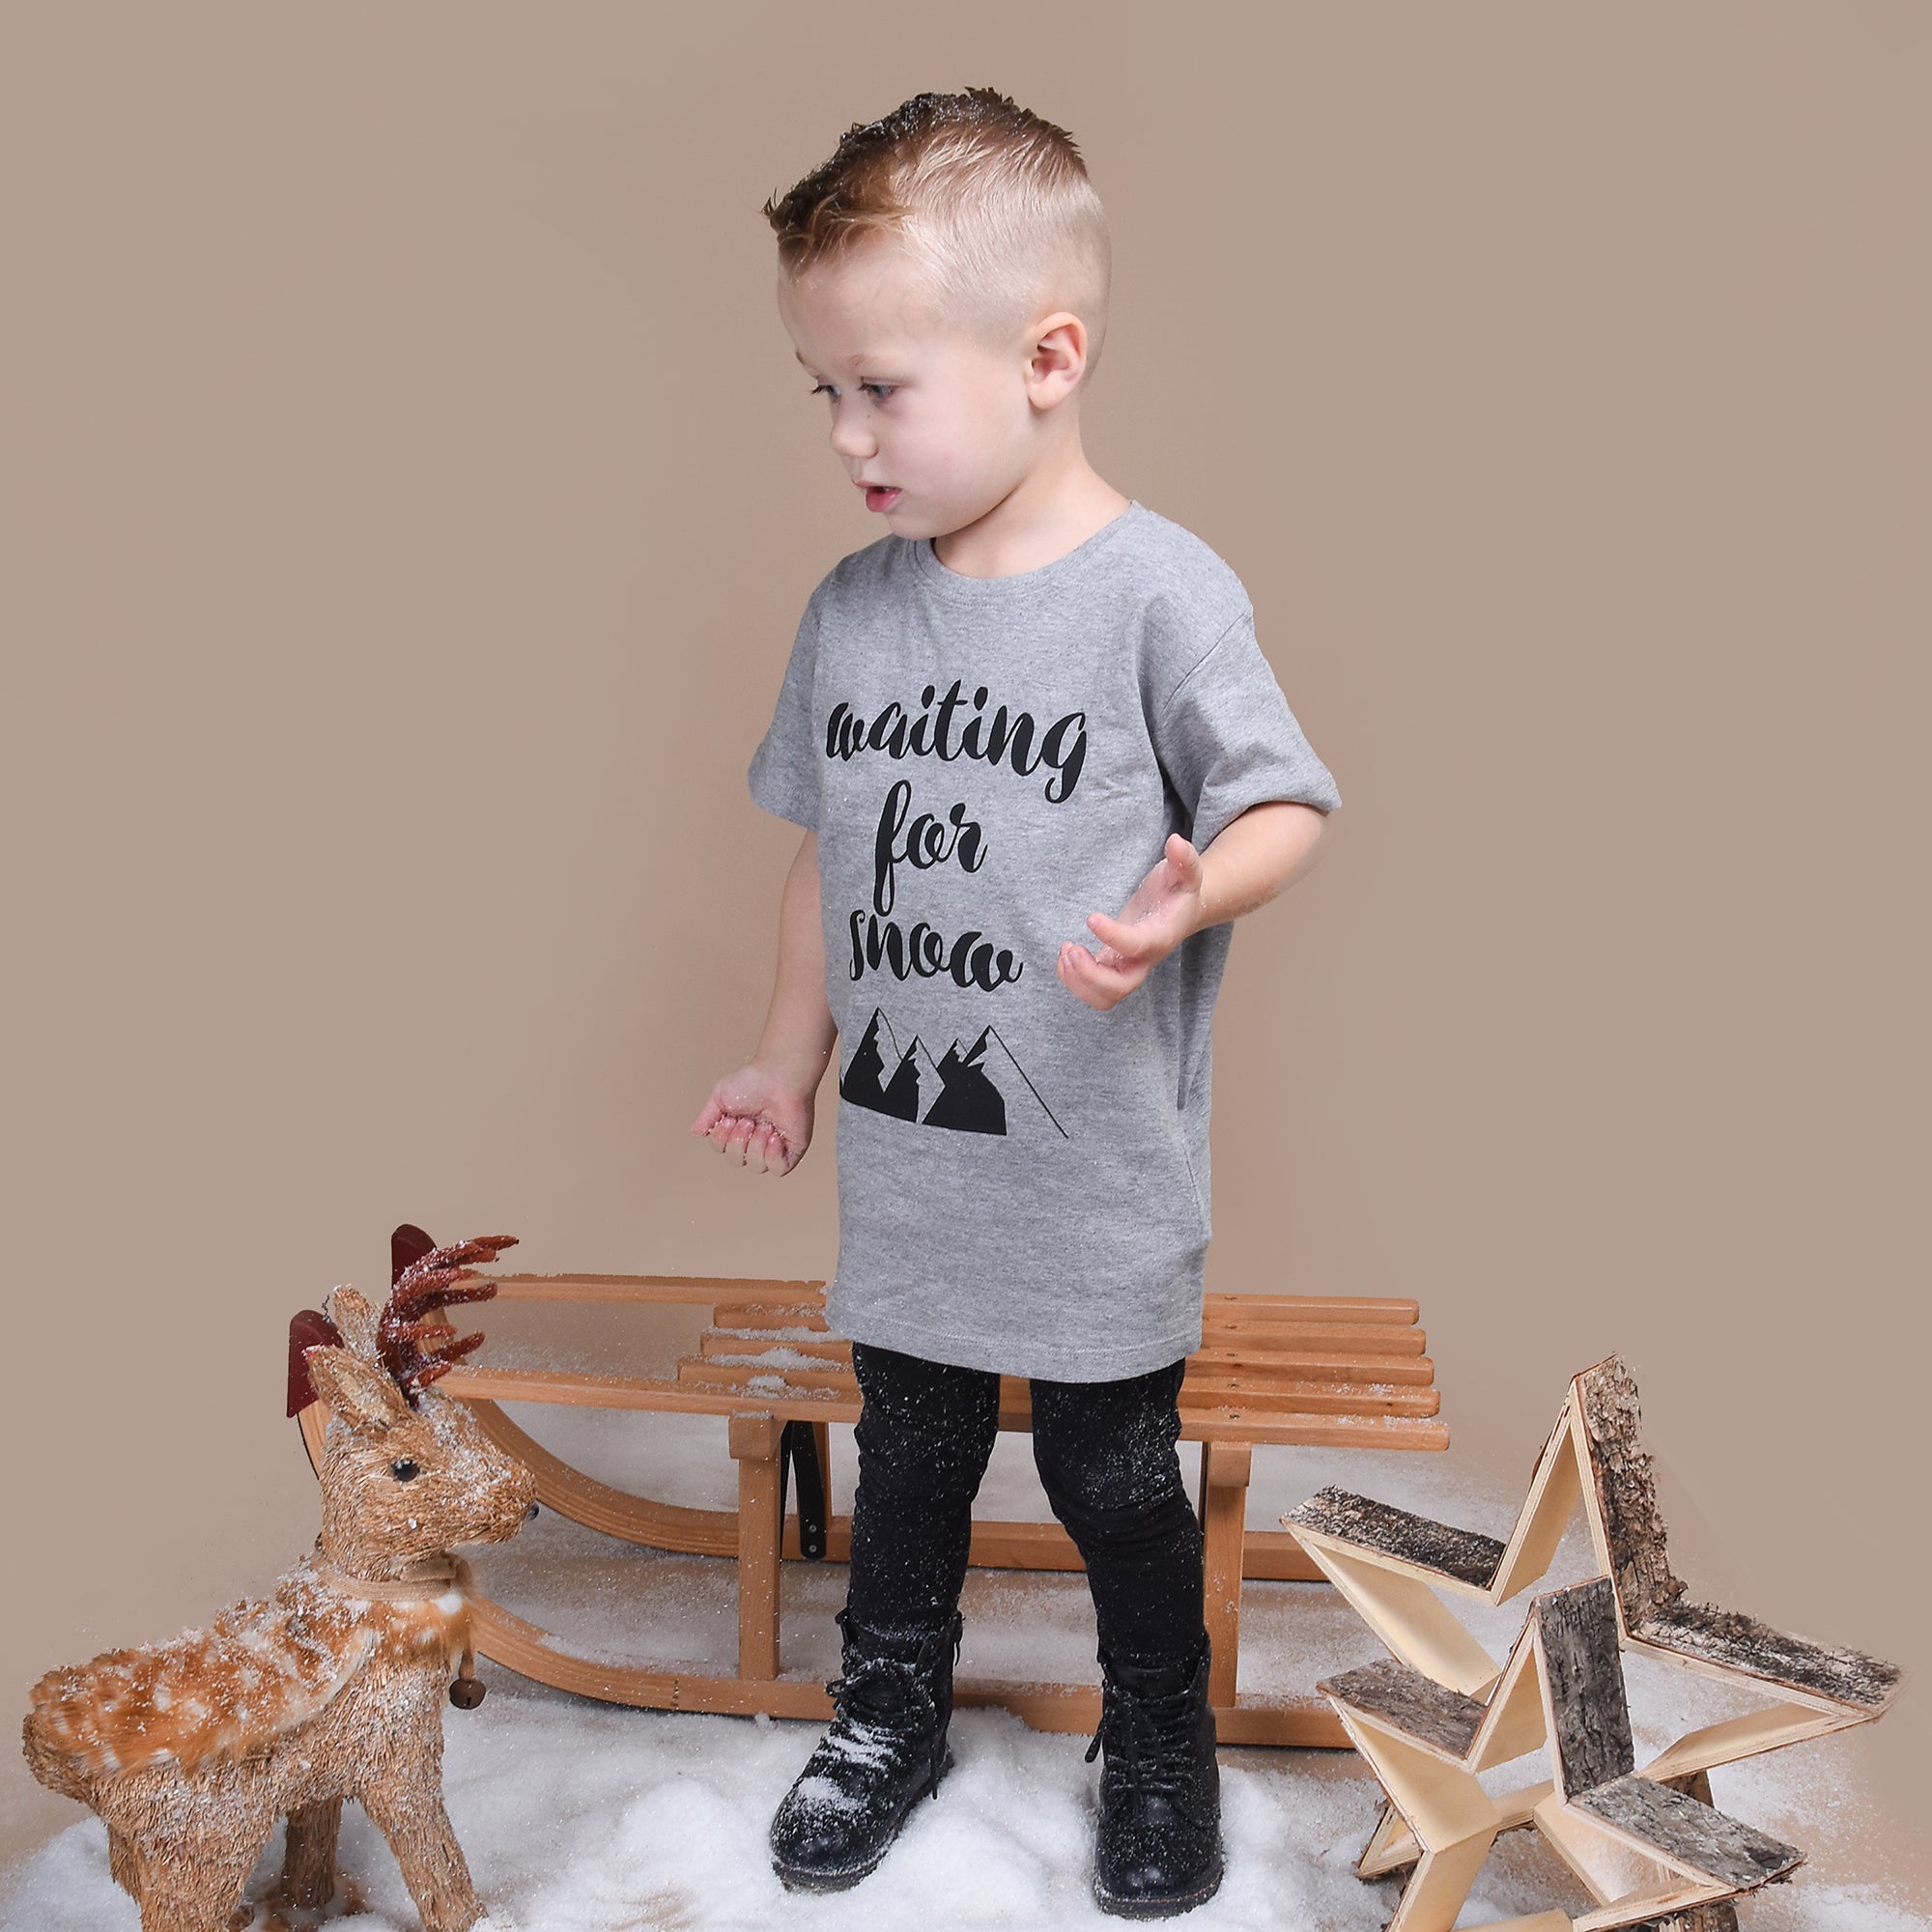 Blonde boy, wearing heather grey shirt with 'Waiting for snow' print by KMLeon.